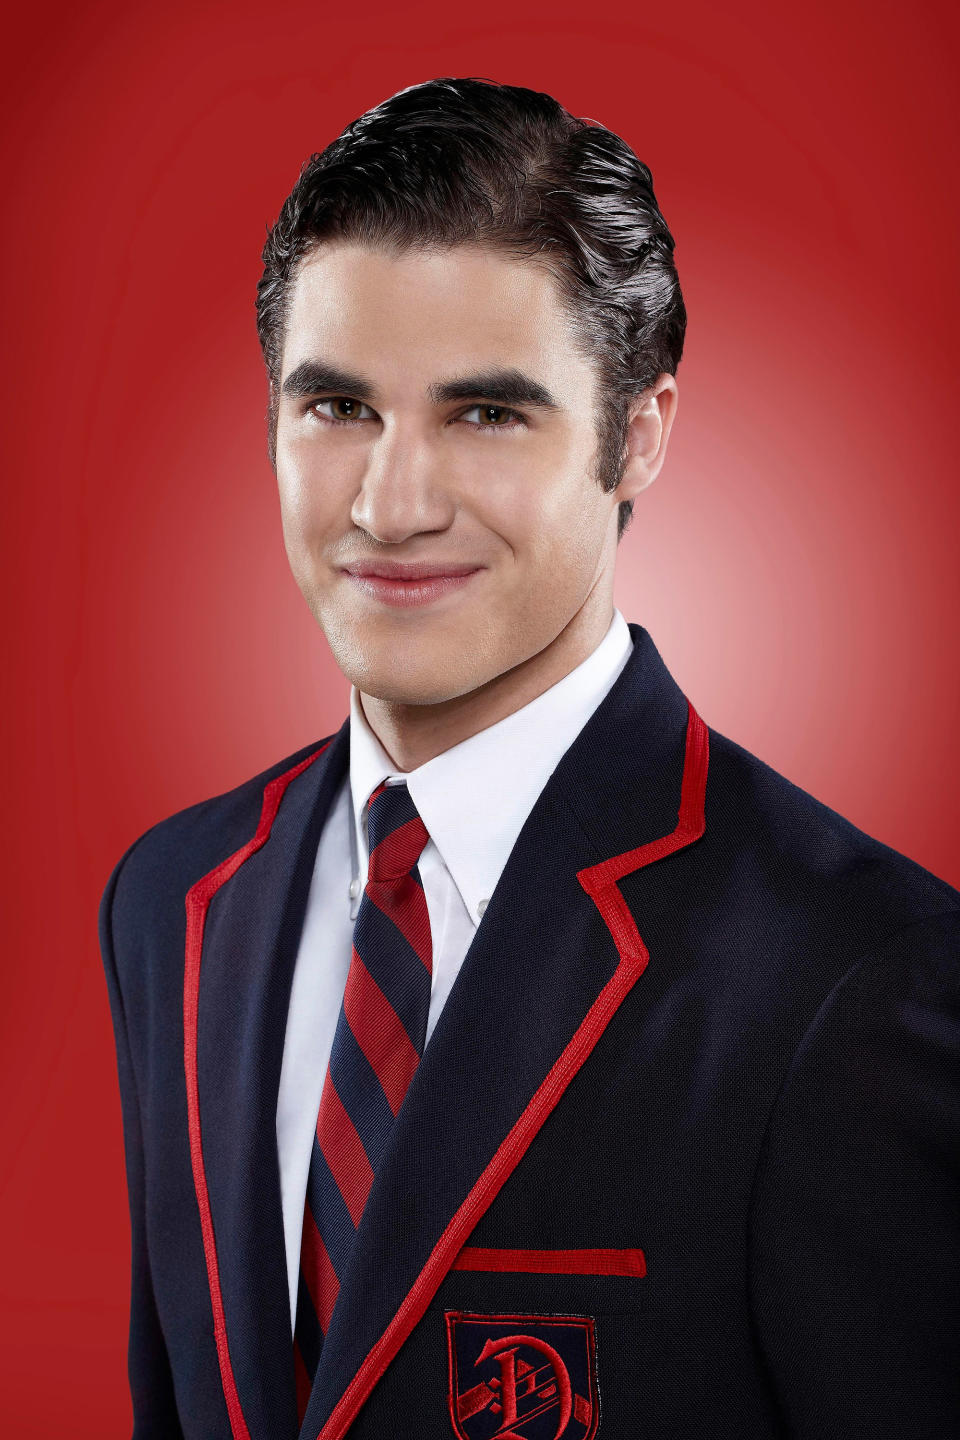 Darren Criss as Blaine smiles in a promotional photo for "Glee"